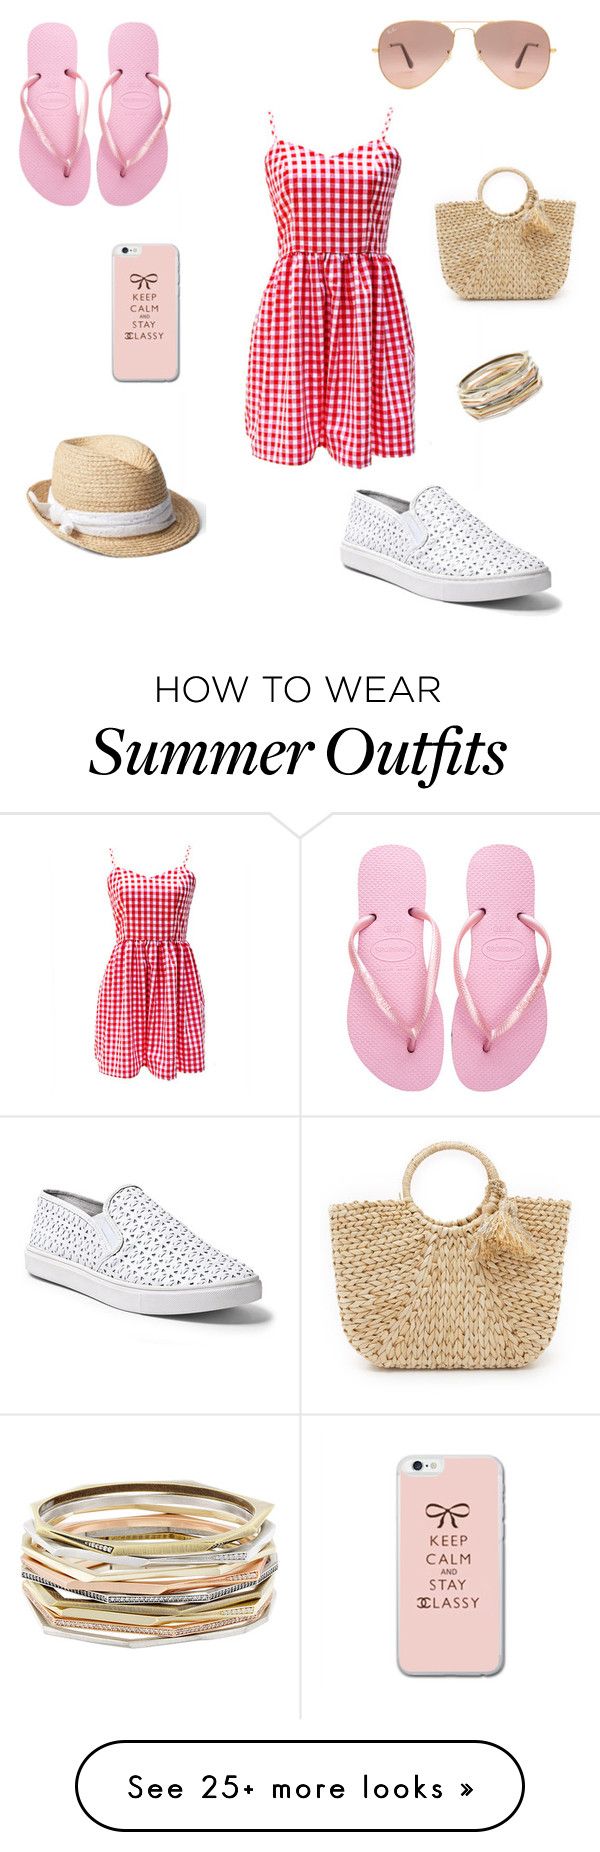 "Beach outfit" by giusynclothes on Polyvore featuring Gap, Steve Madde...